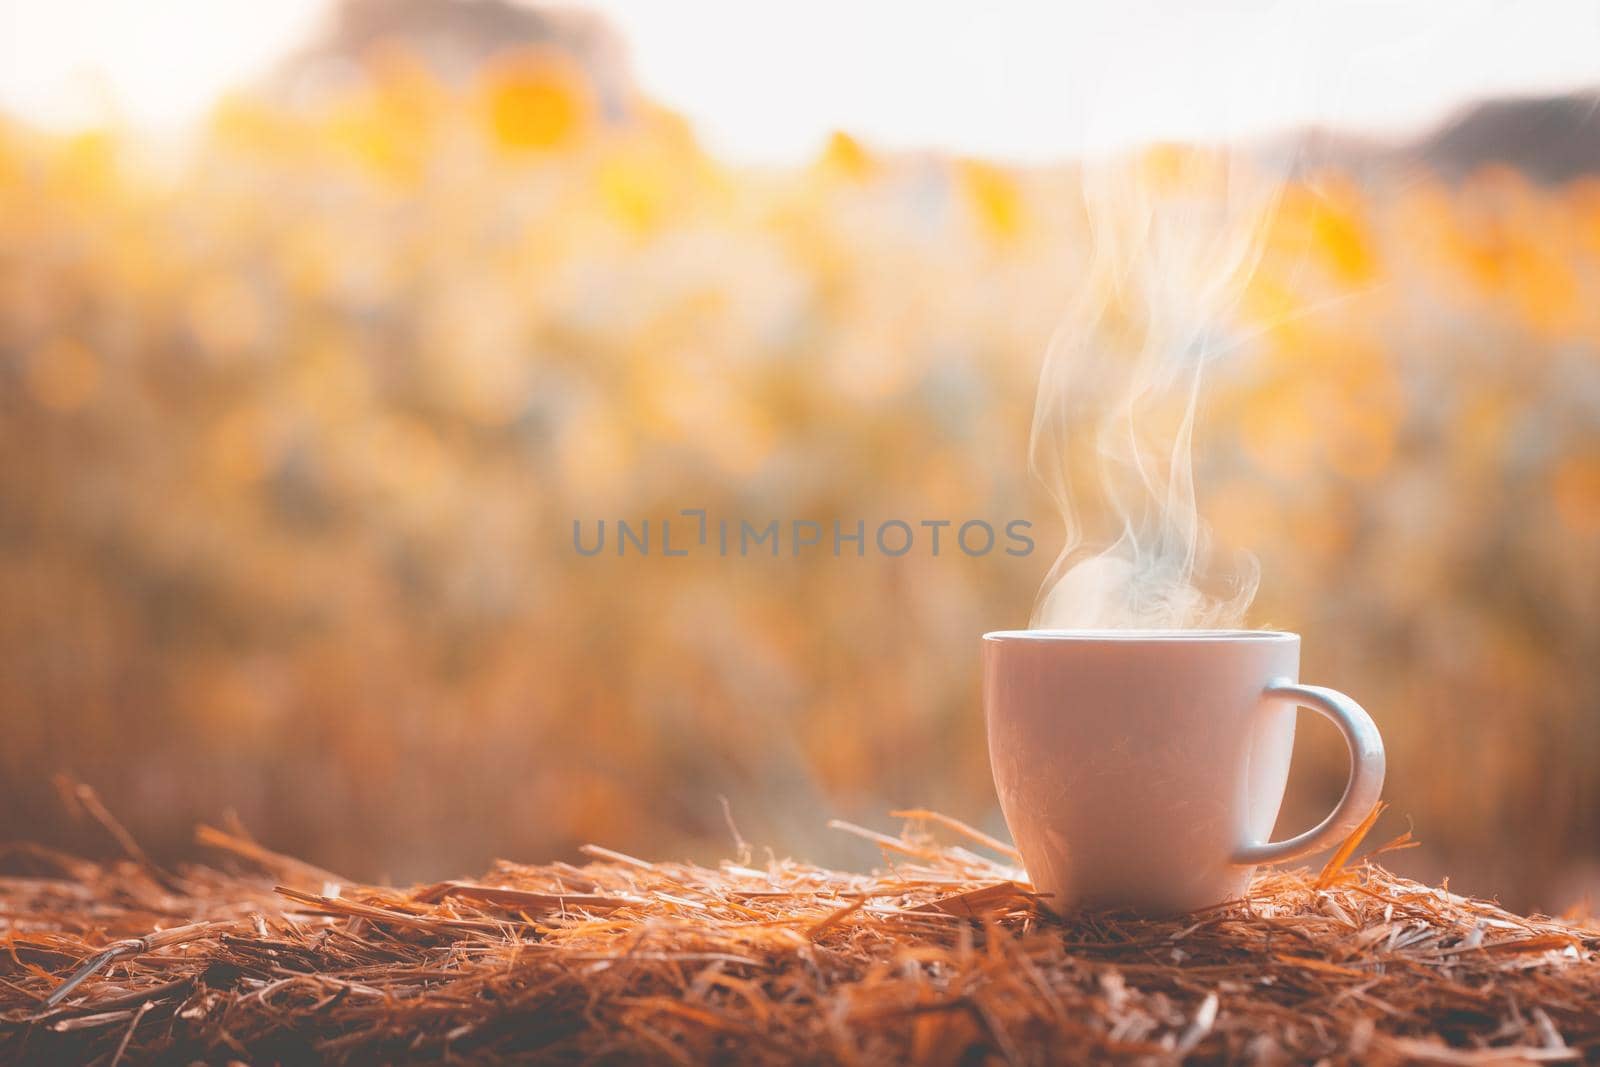 Coffee cup with blurred flower background